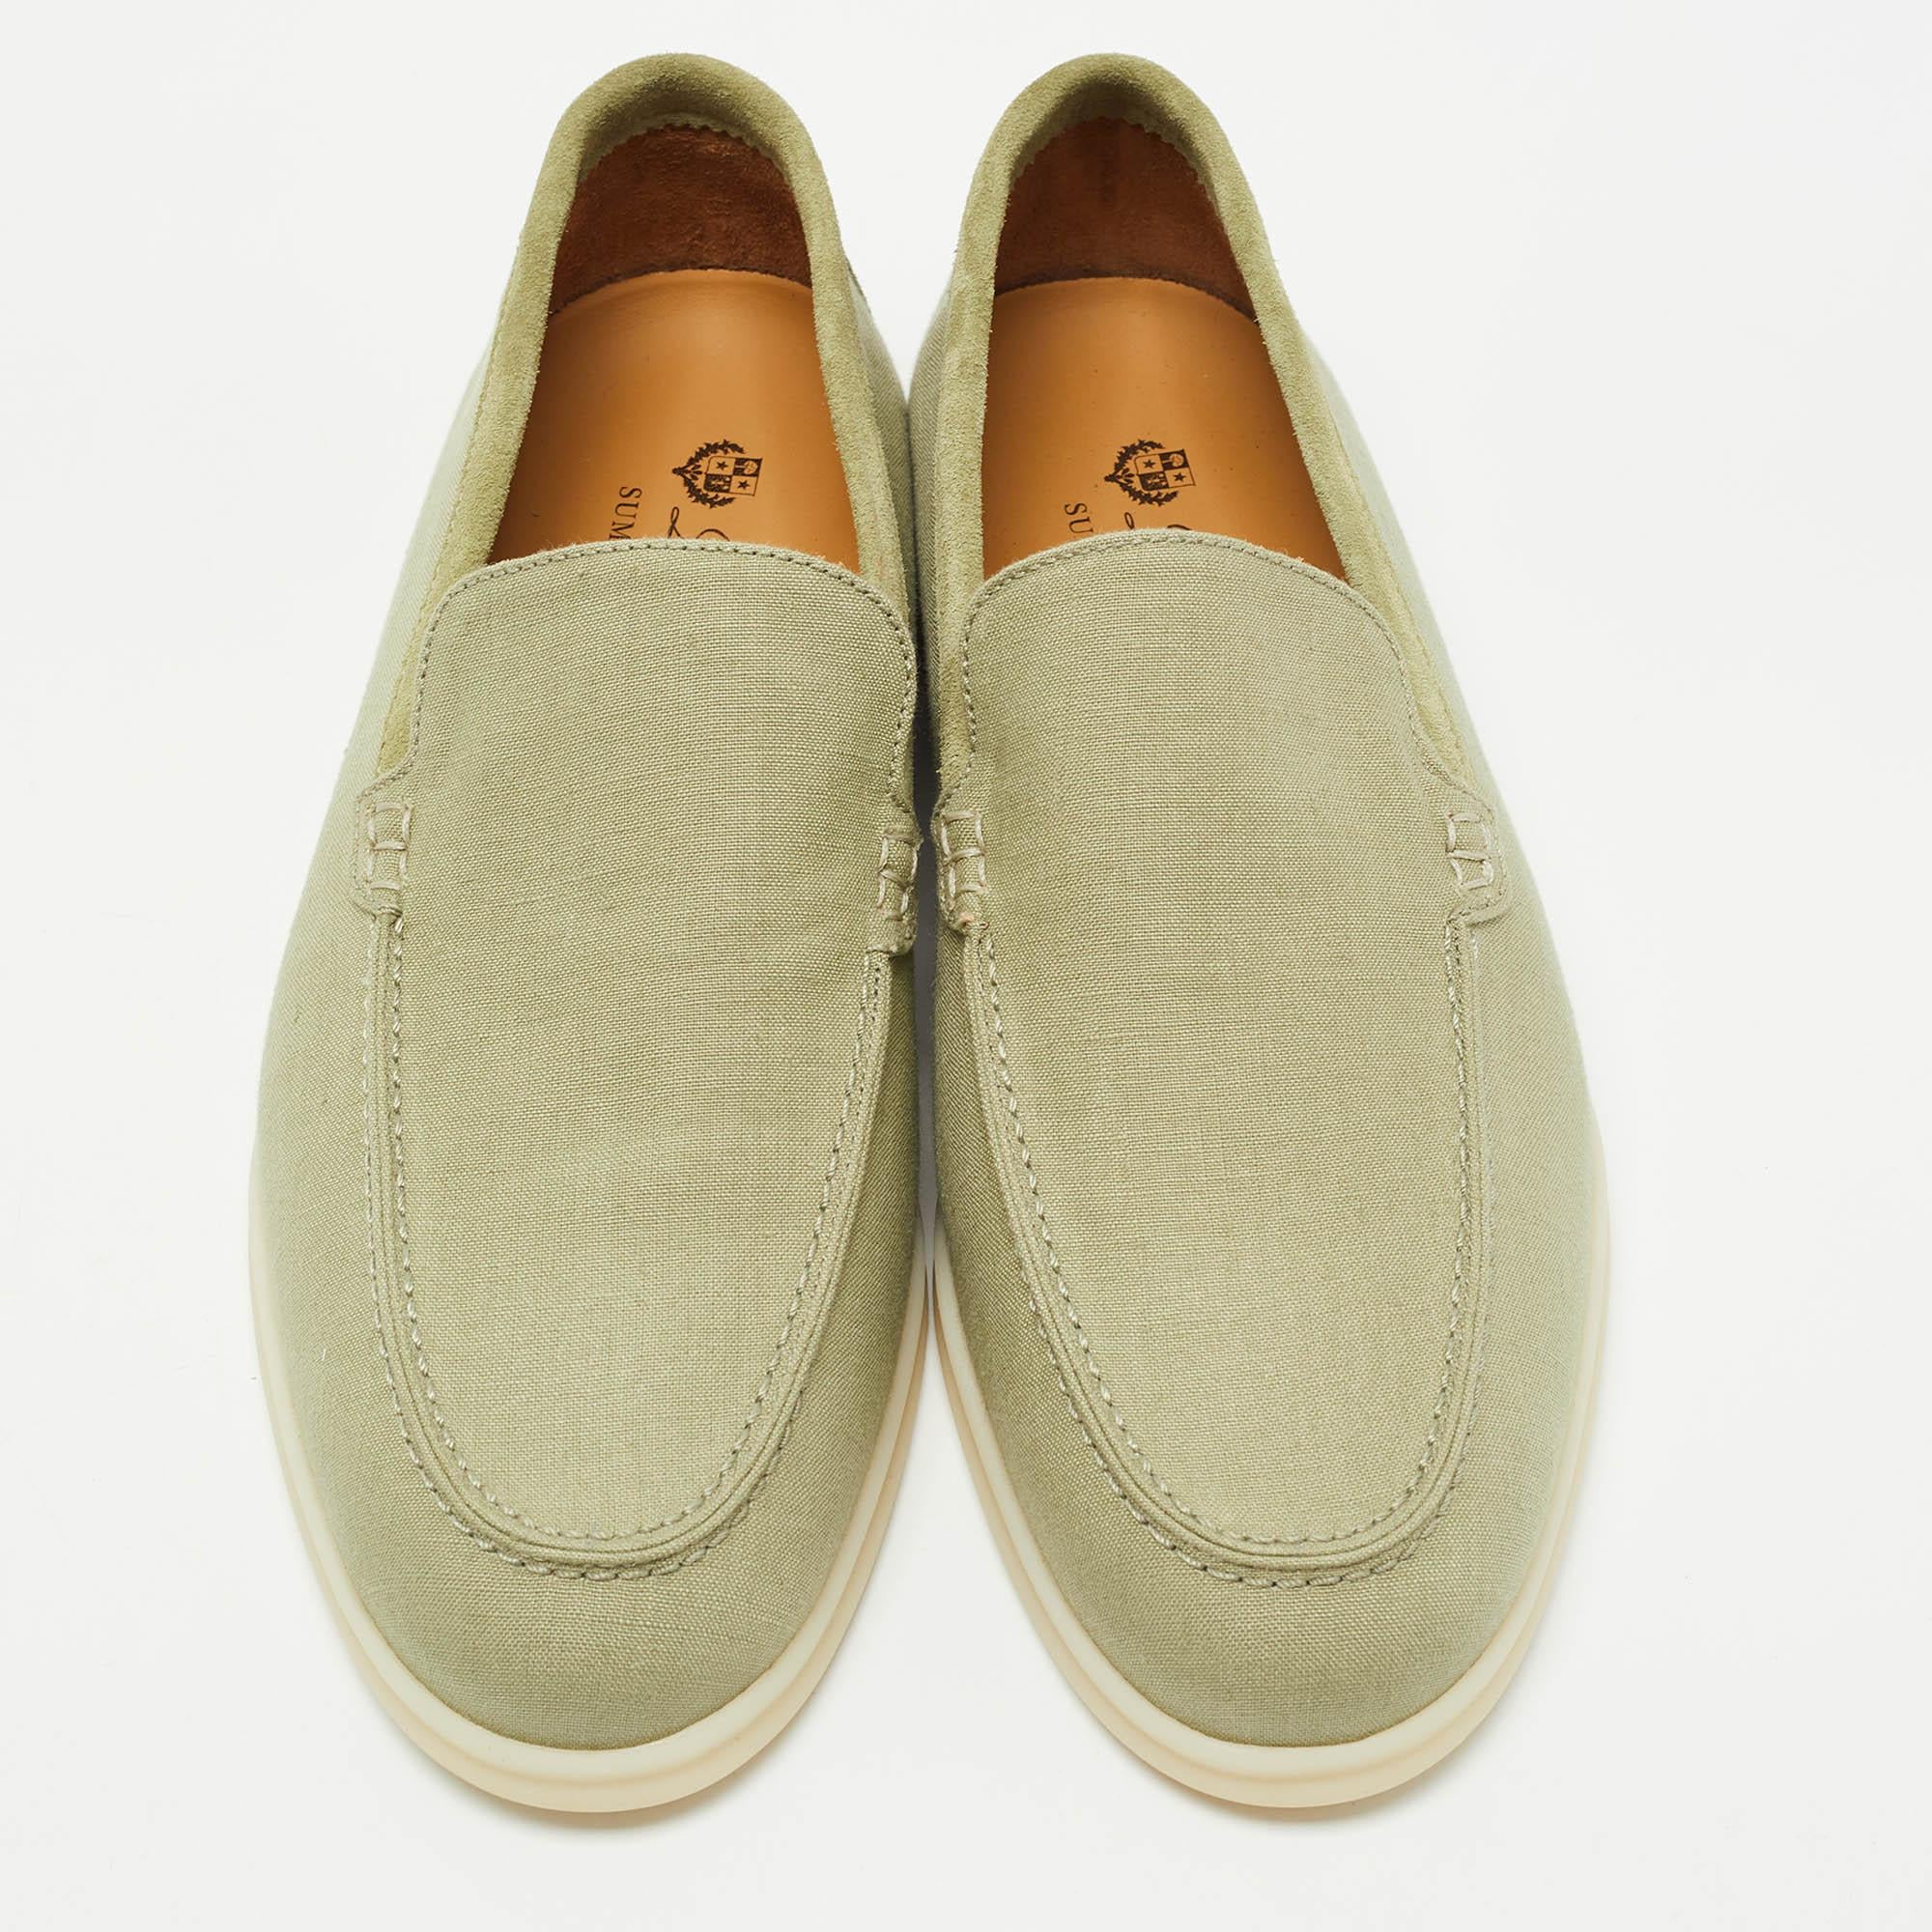 These luxe Summer Walk loafers from Loro Piana are crafted from suede & fabric into a neat design with sleek cuts. They flaunt round toes, comfortable leather-lined insoles, and durable rubber soles.

Includes: Original Dustbag, Original Box